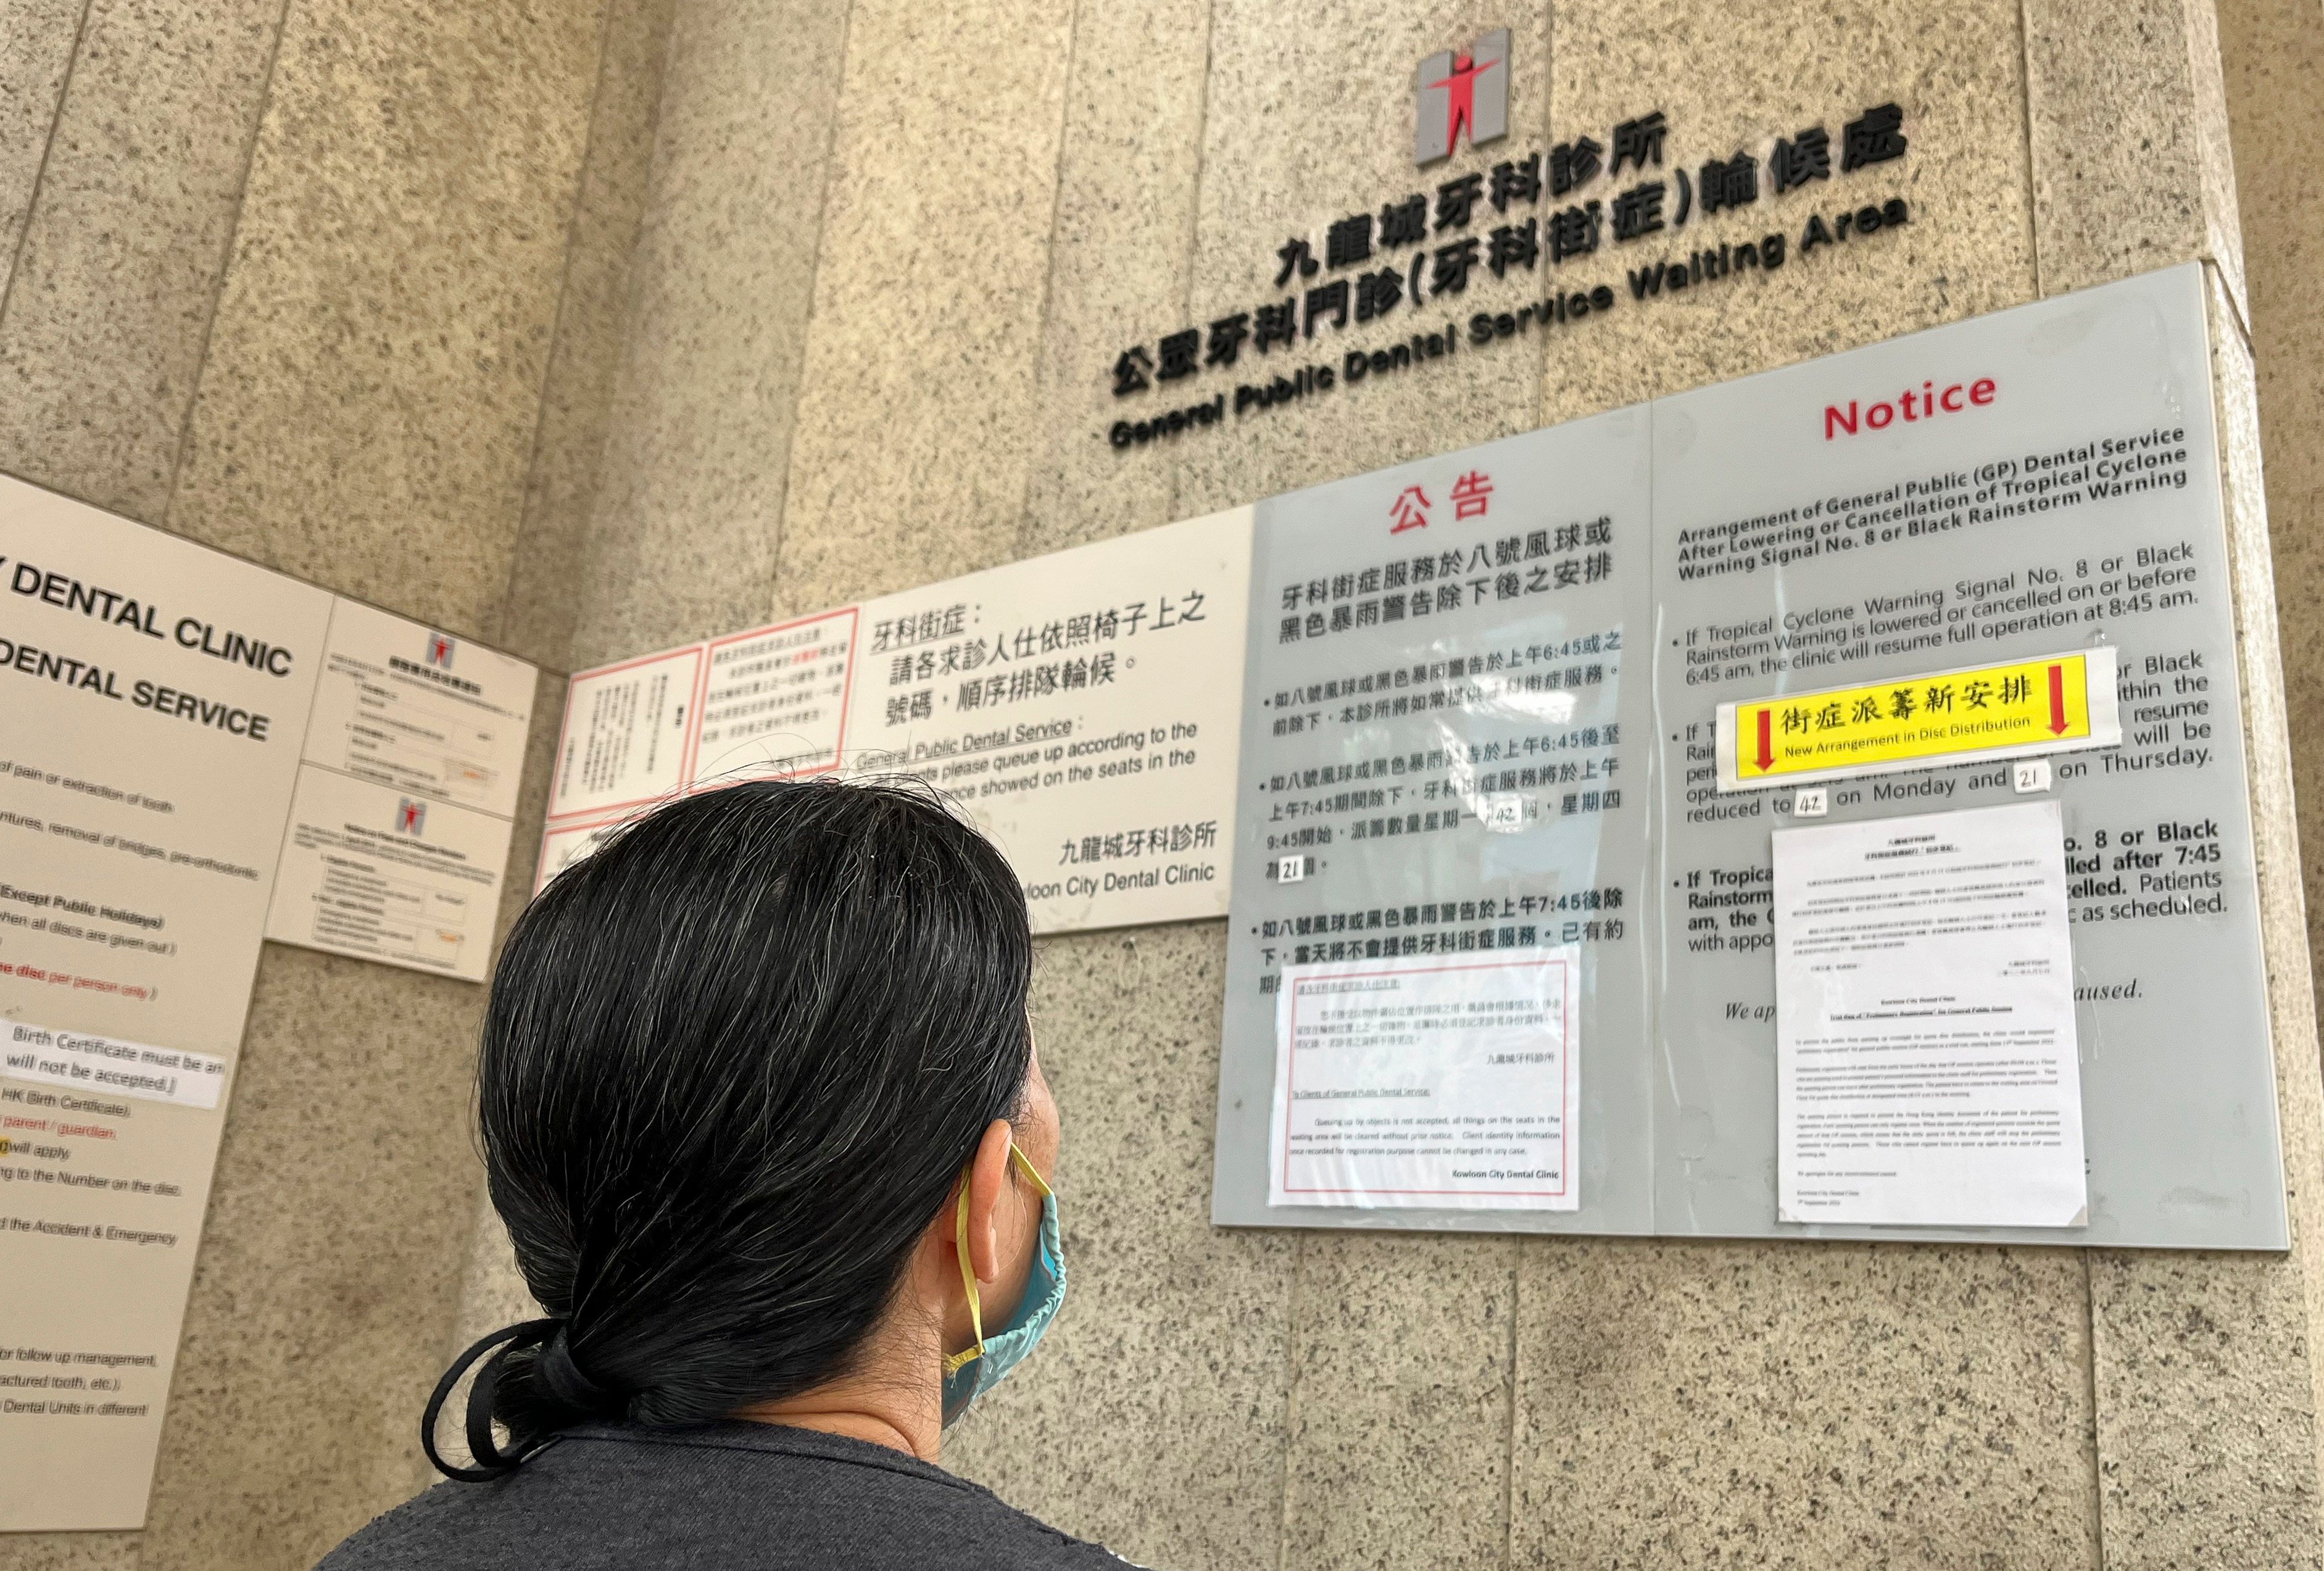 Health authorities are adjusting time slots for preliminary registration for dental appointments at government clinics. Photo: Sammy Heung